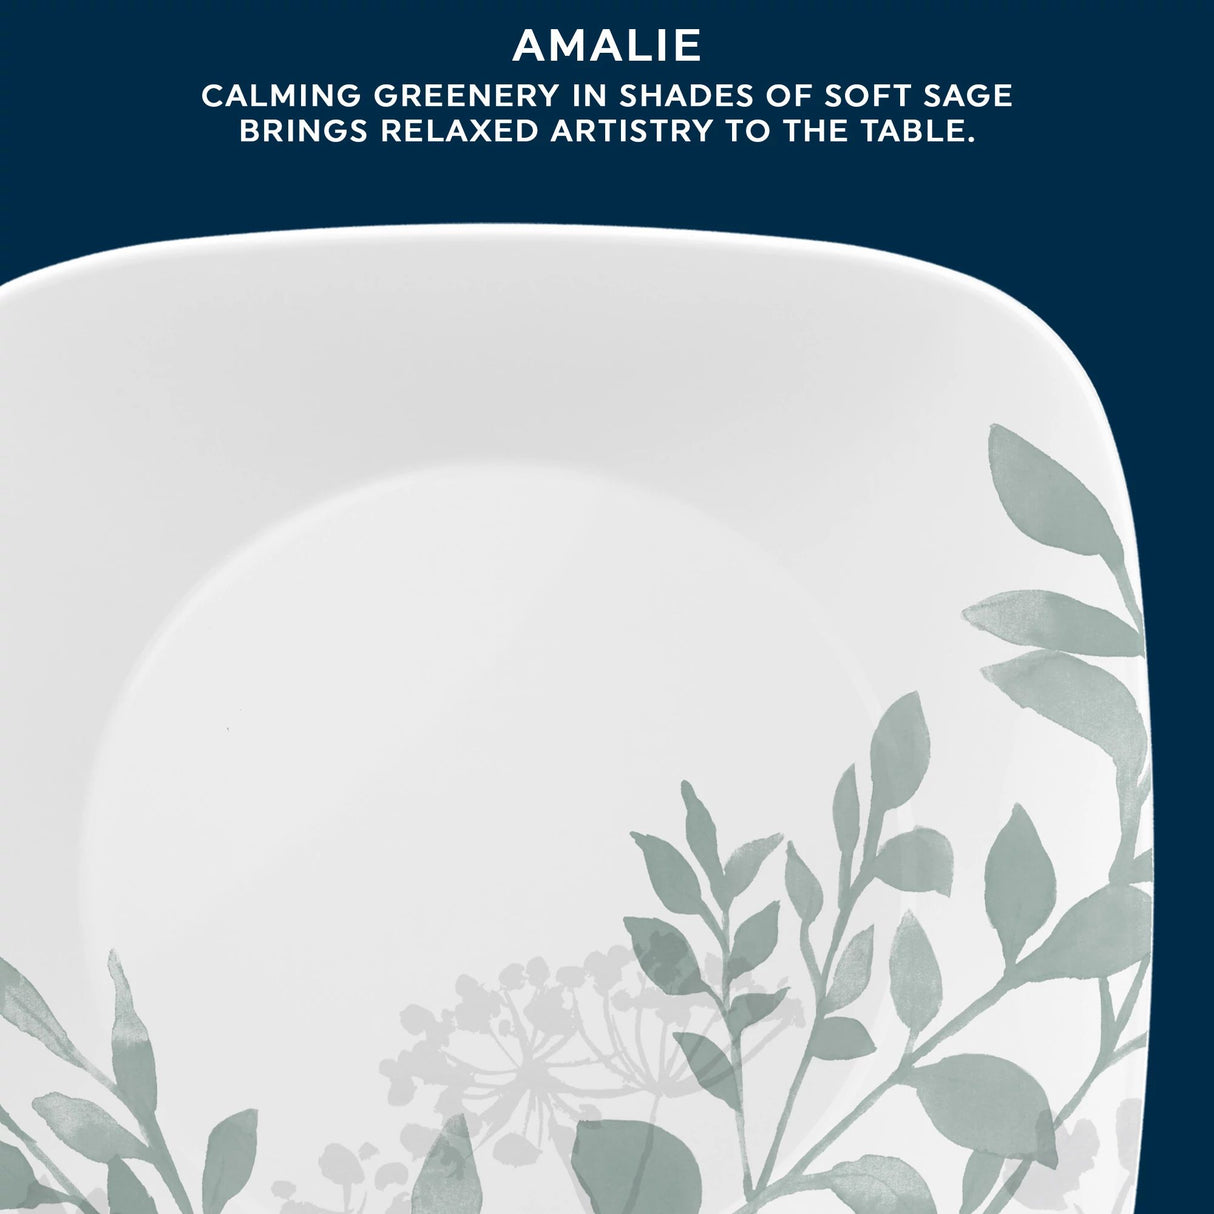  Square Amalie 6.75" Salad Plate text calming greenery in shads of soft sage brings relaxed artistry to the table